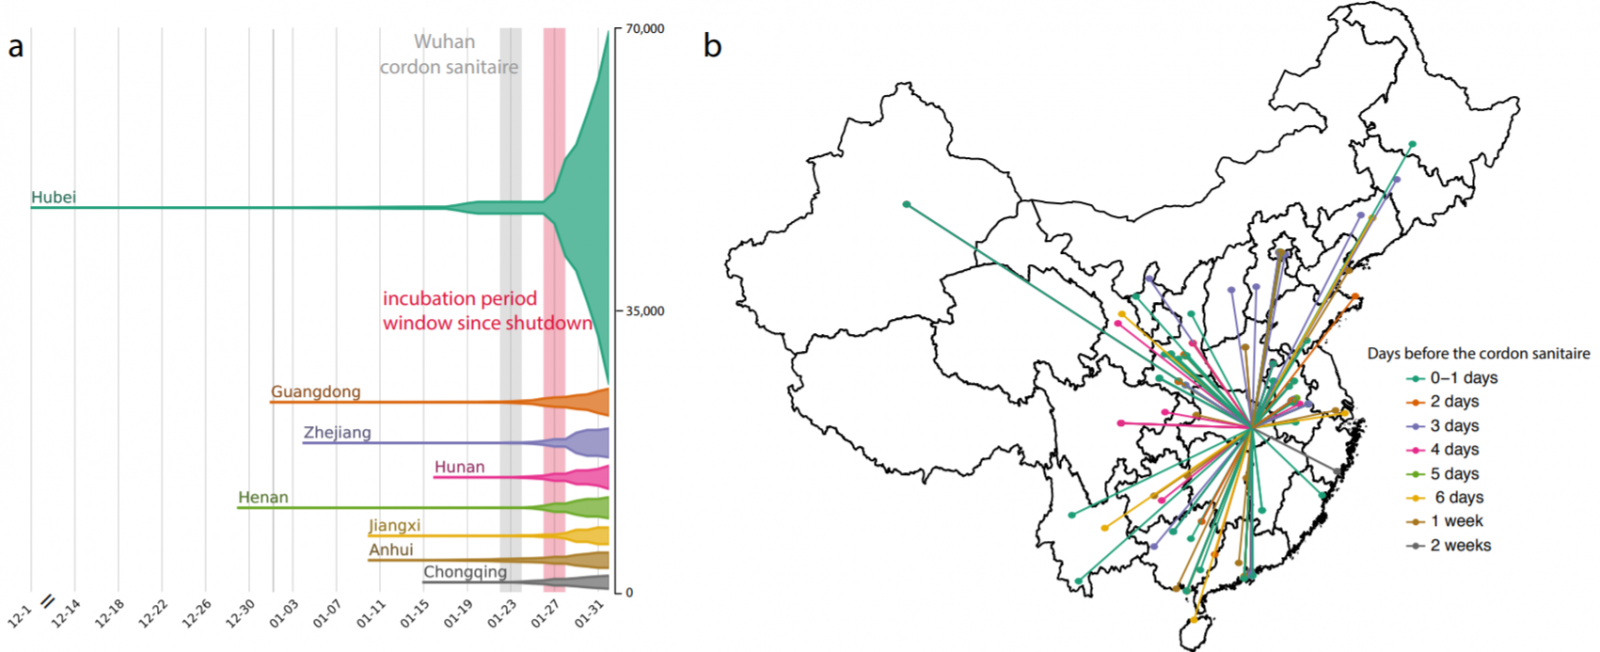 (a) The epidemic curve of the COVID-19 outbreak in provinces in China. (b) Map of COVID-19 confirmed cases (n = 554) that had reported travel history from Wuhan before travel restrictions.